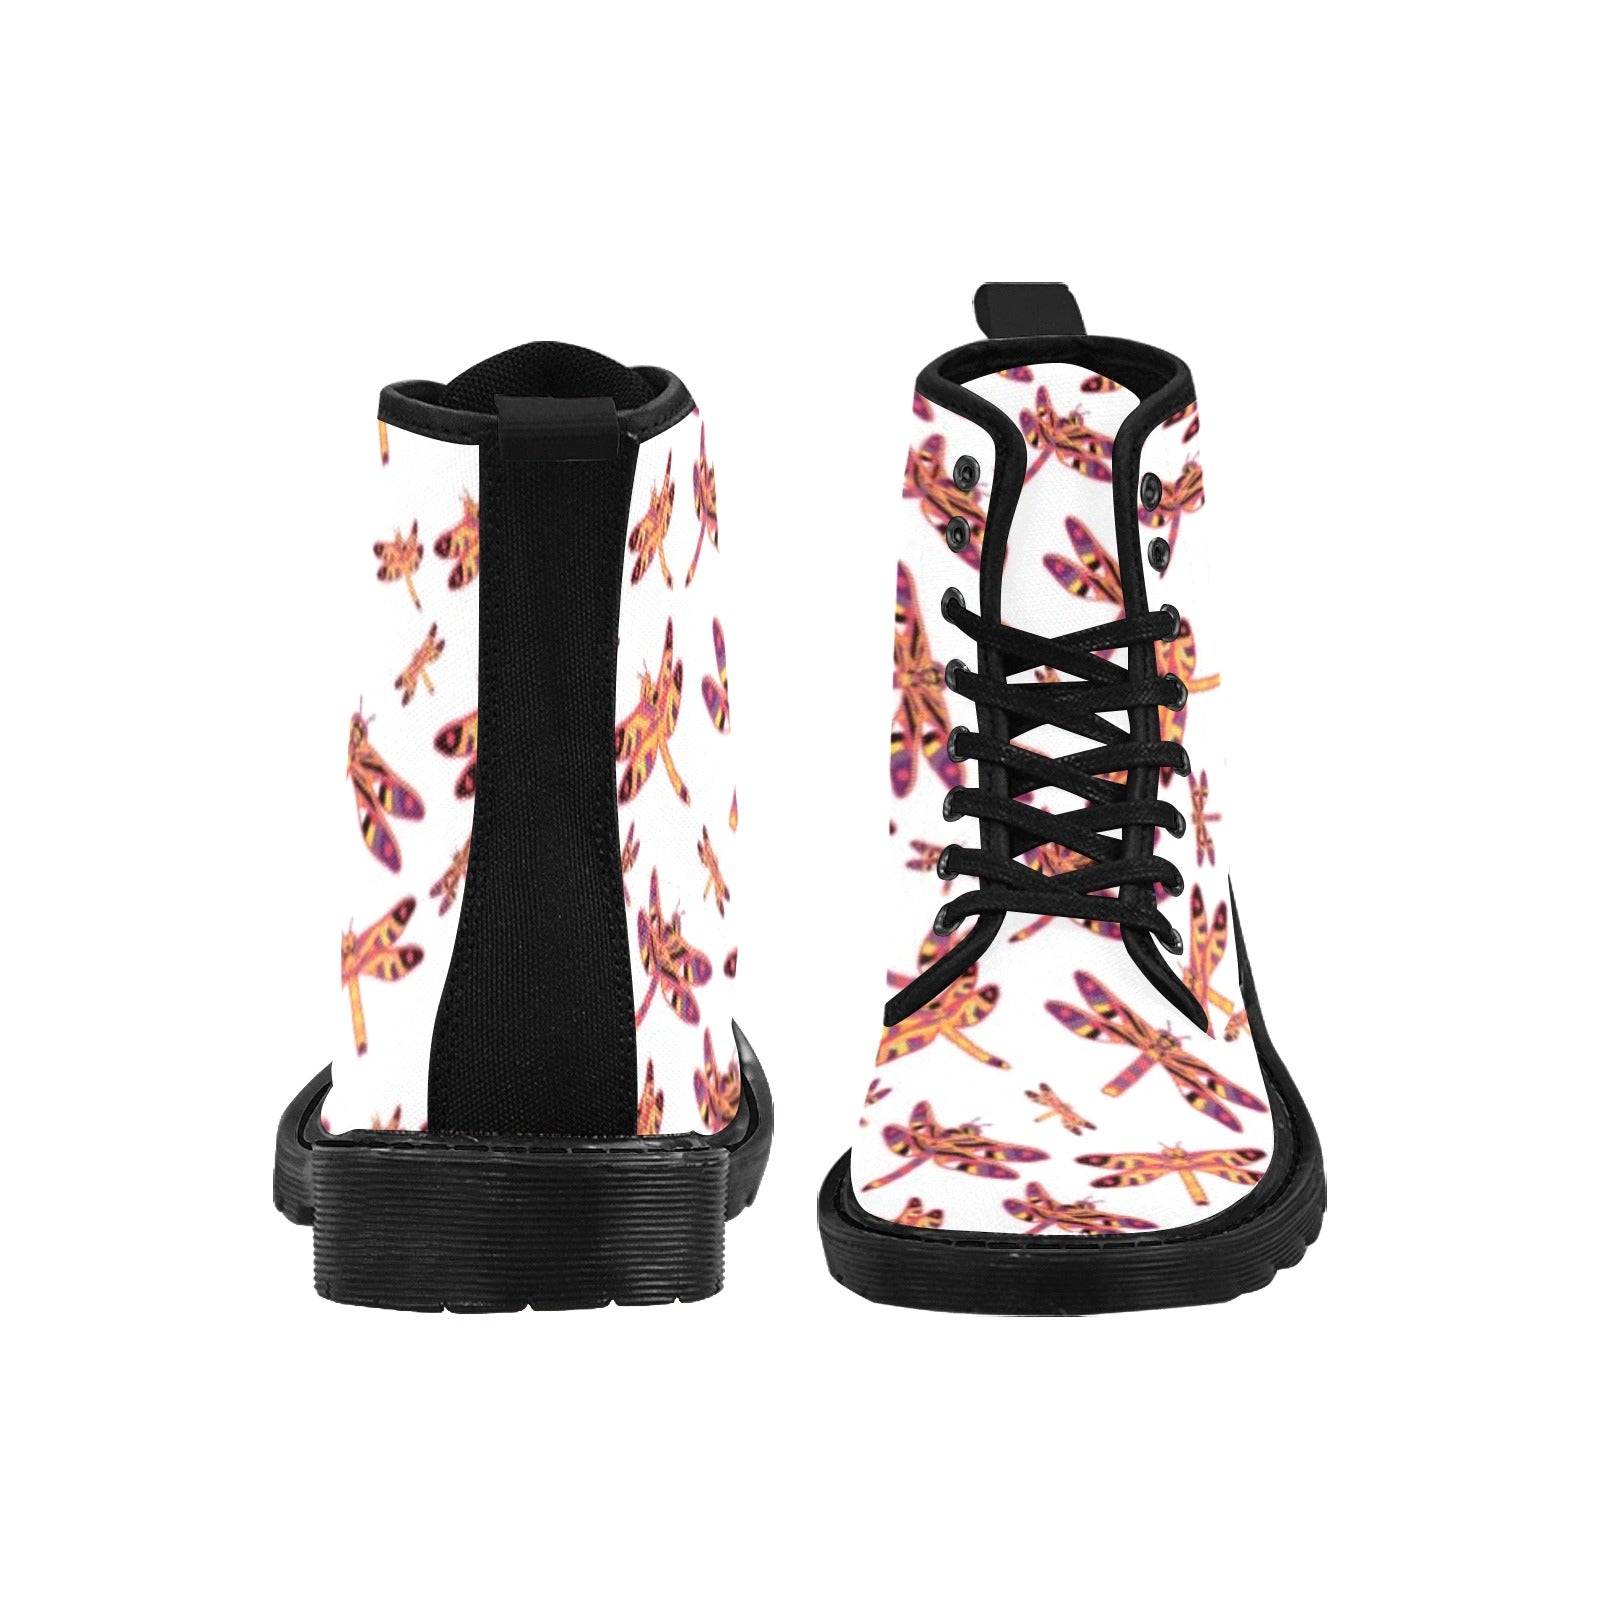 Gathering White Boots for Women (Black)